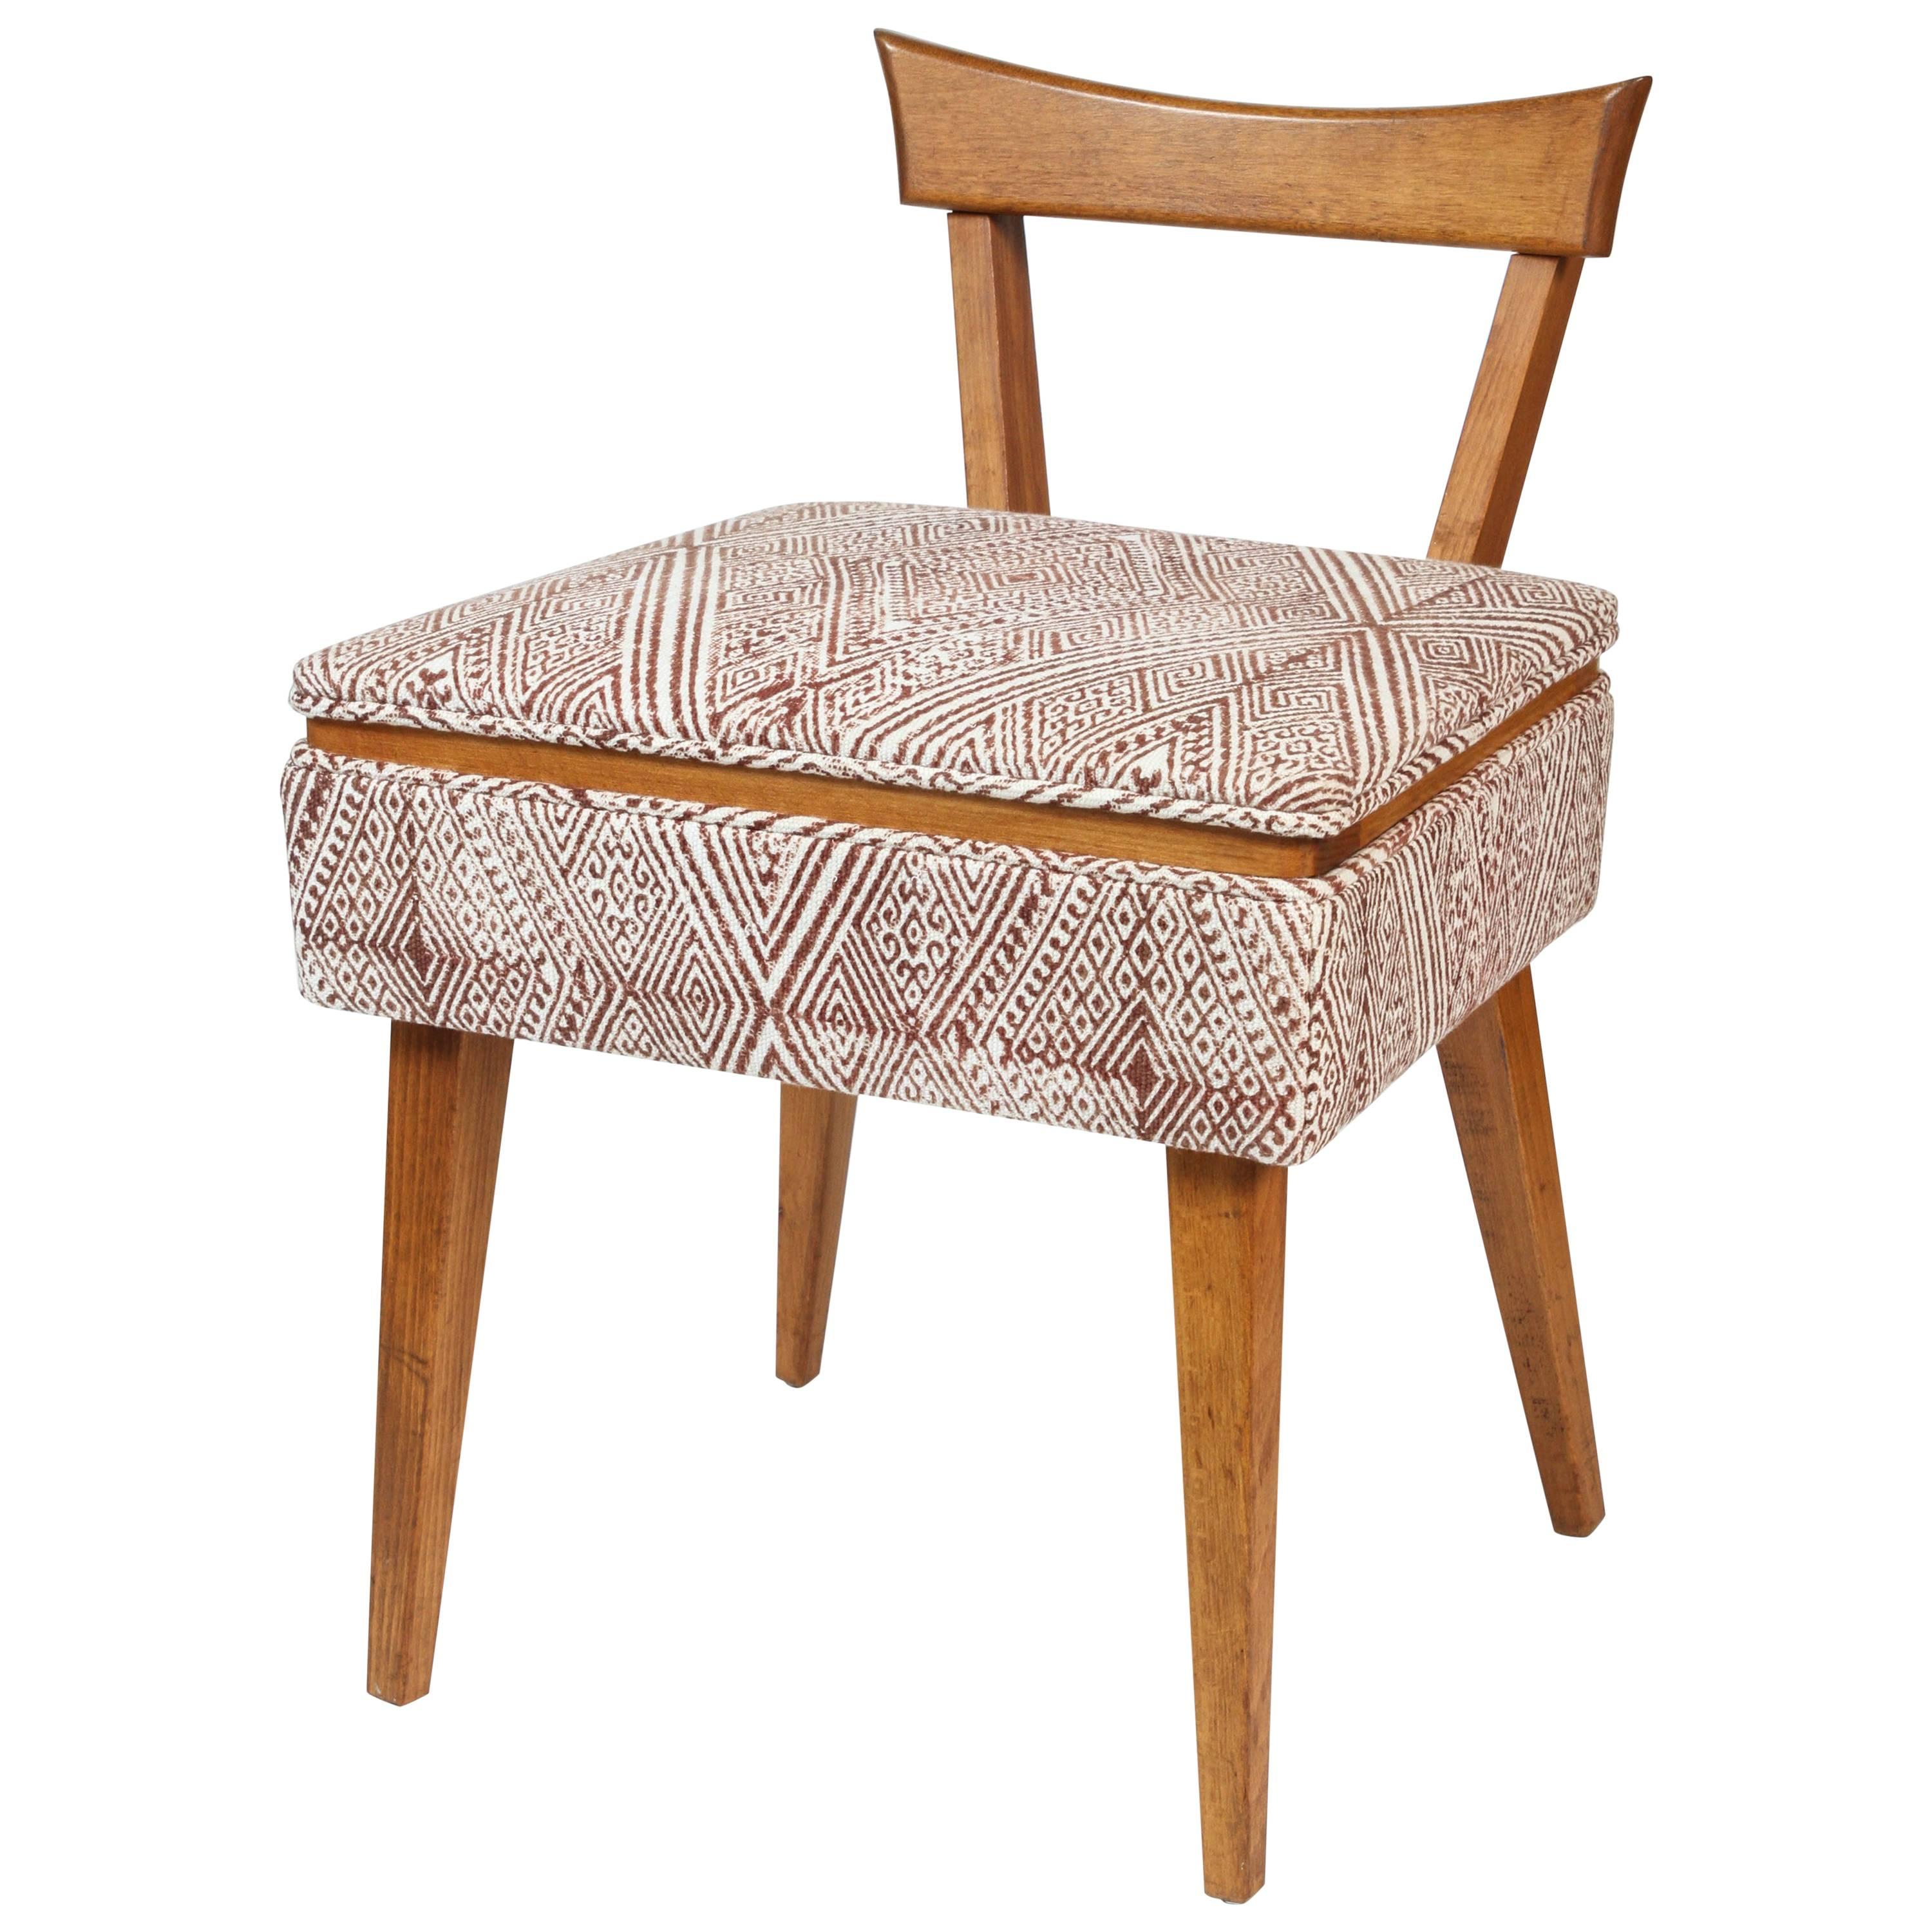 Midcentury Sewing Chair in John Robshaw Fabric